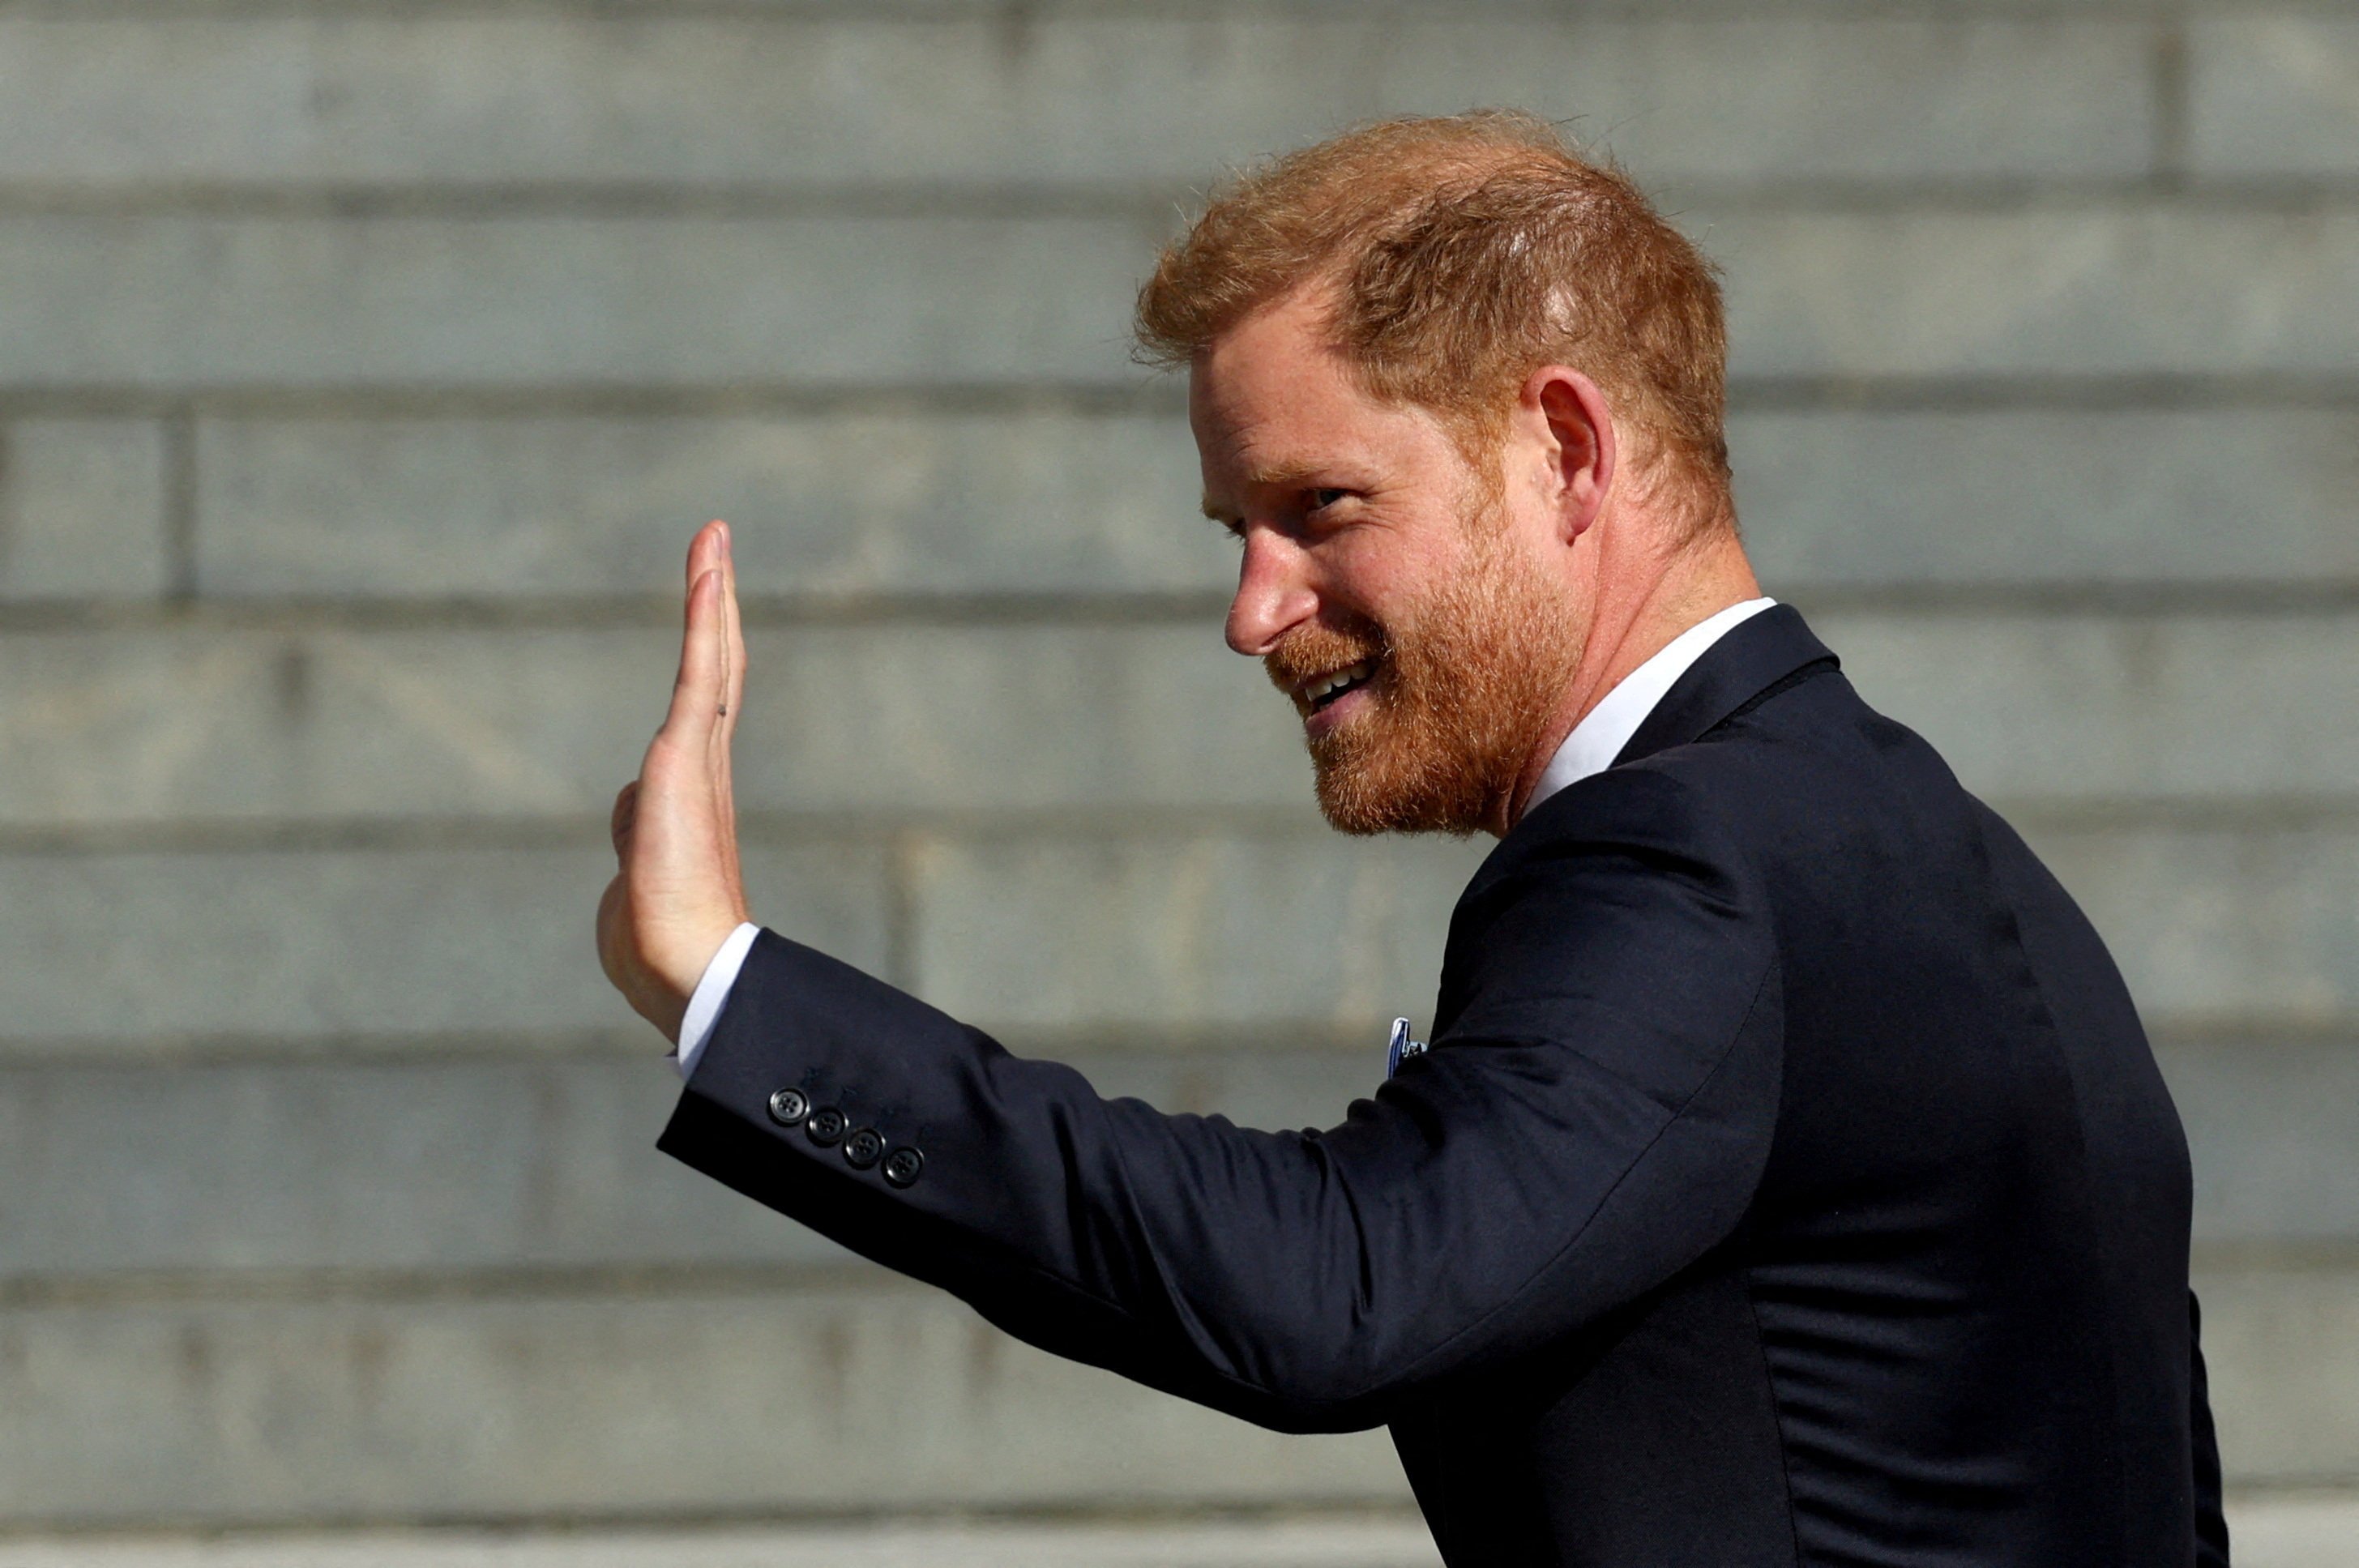 A lawyer for a British tabloid accused Prince Harry of destroying documents sought in litigation. Photo: Reuters